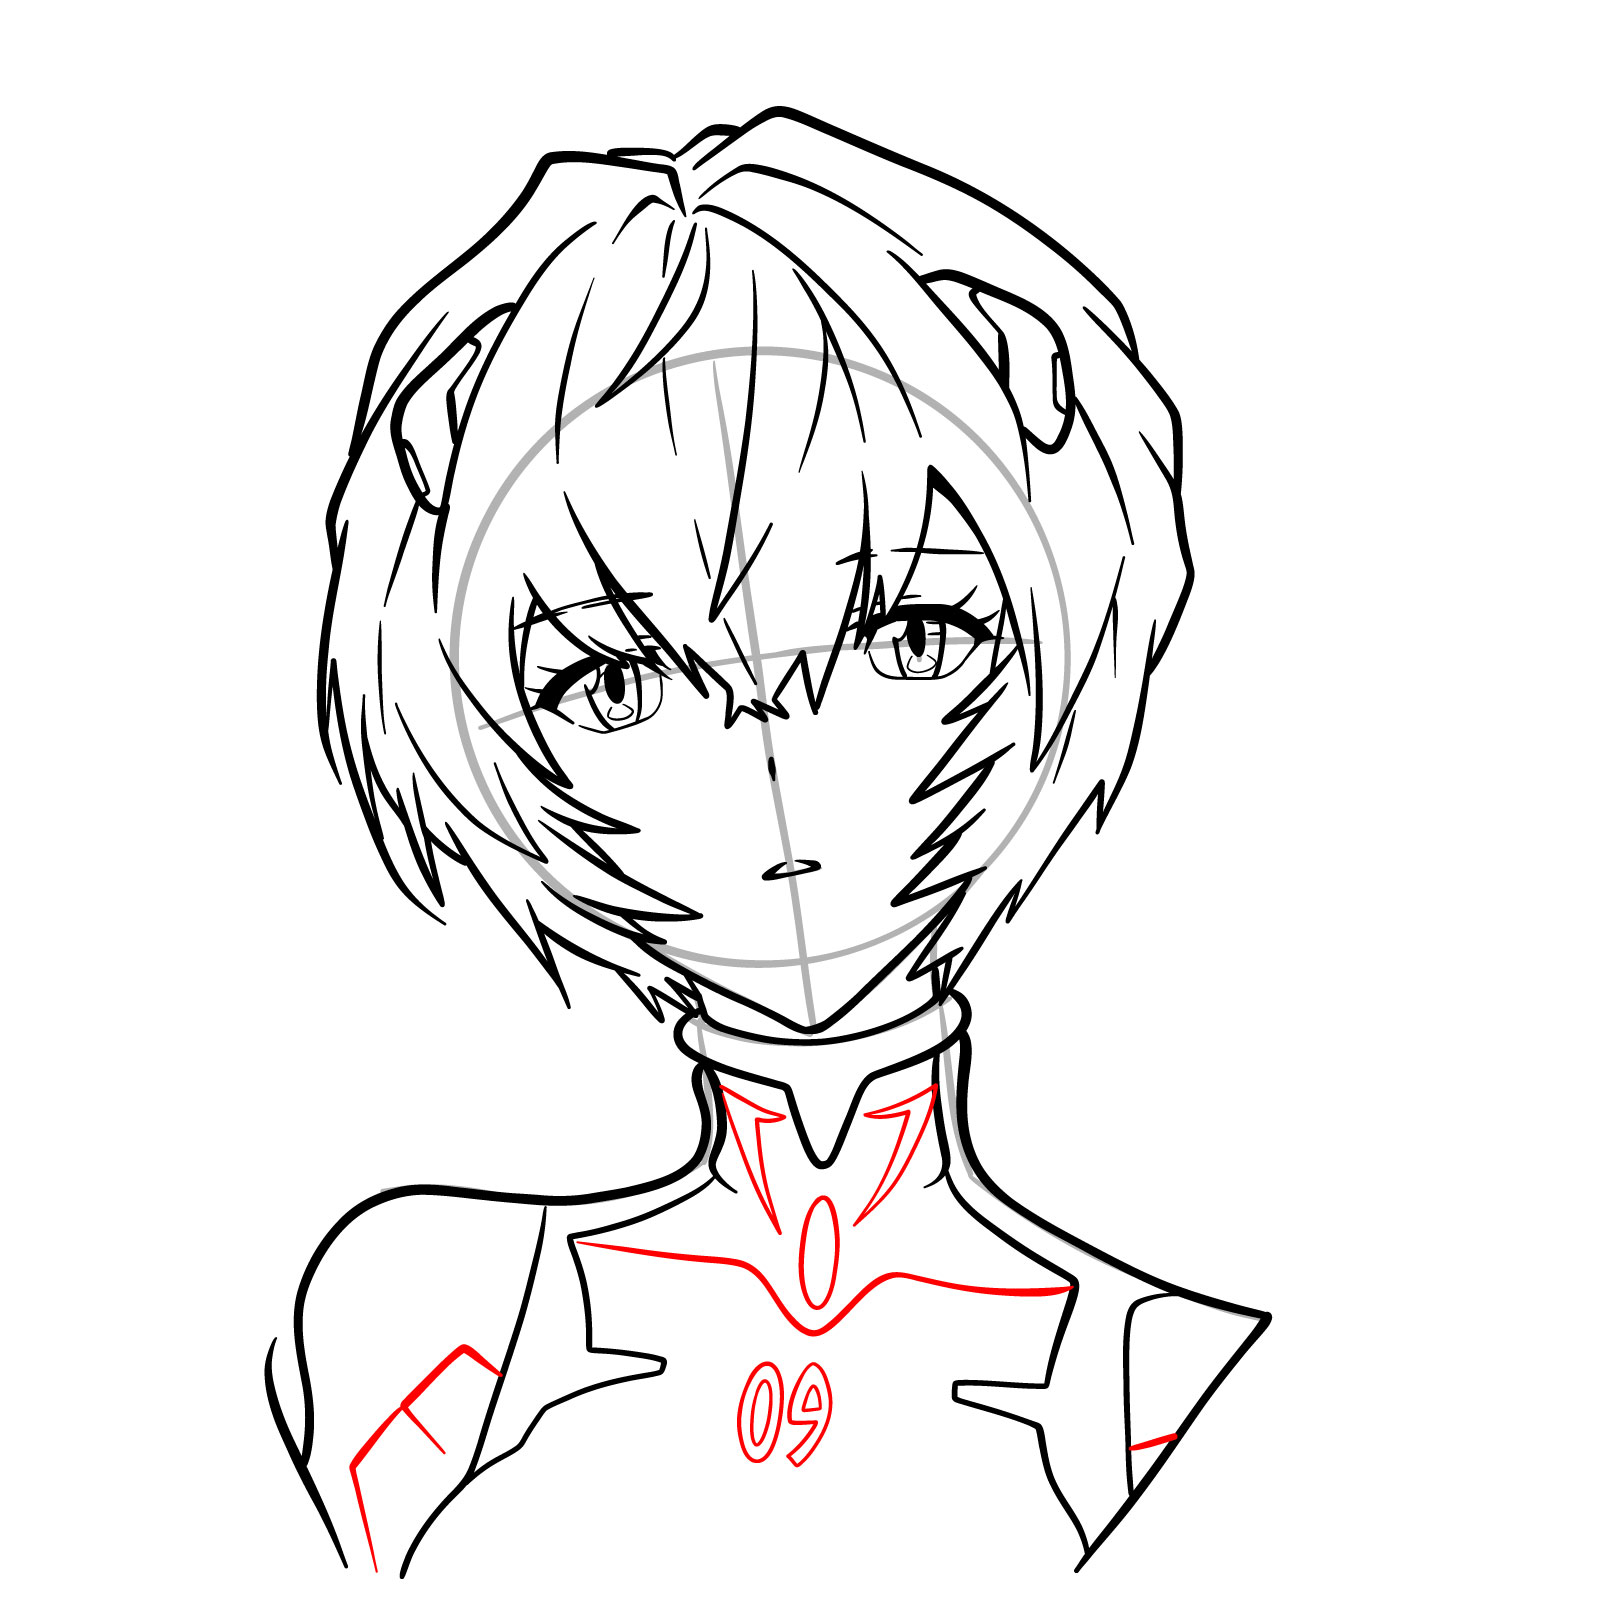 How to draw Rei Ayanami's face - Evangelion - step 20